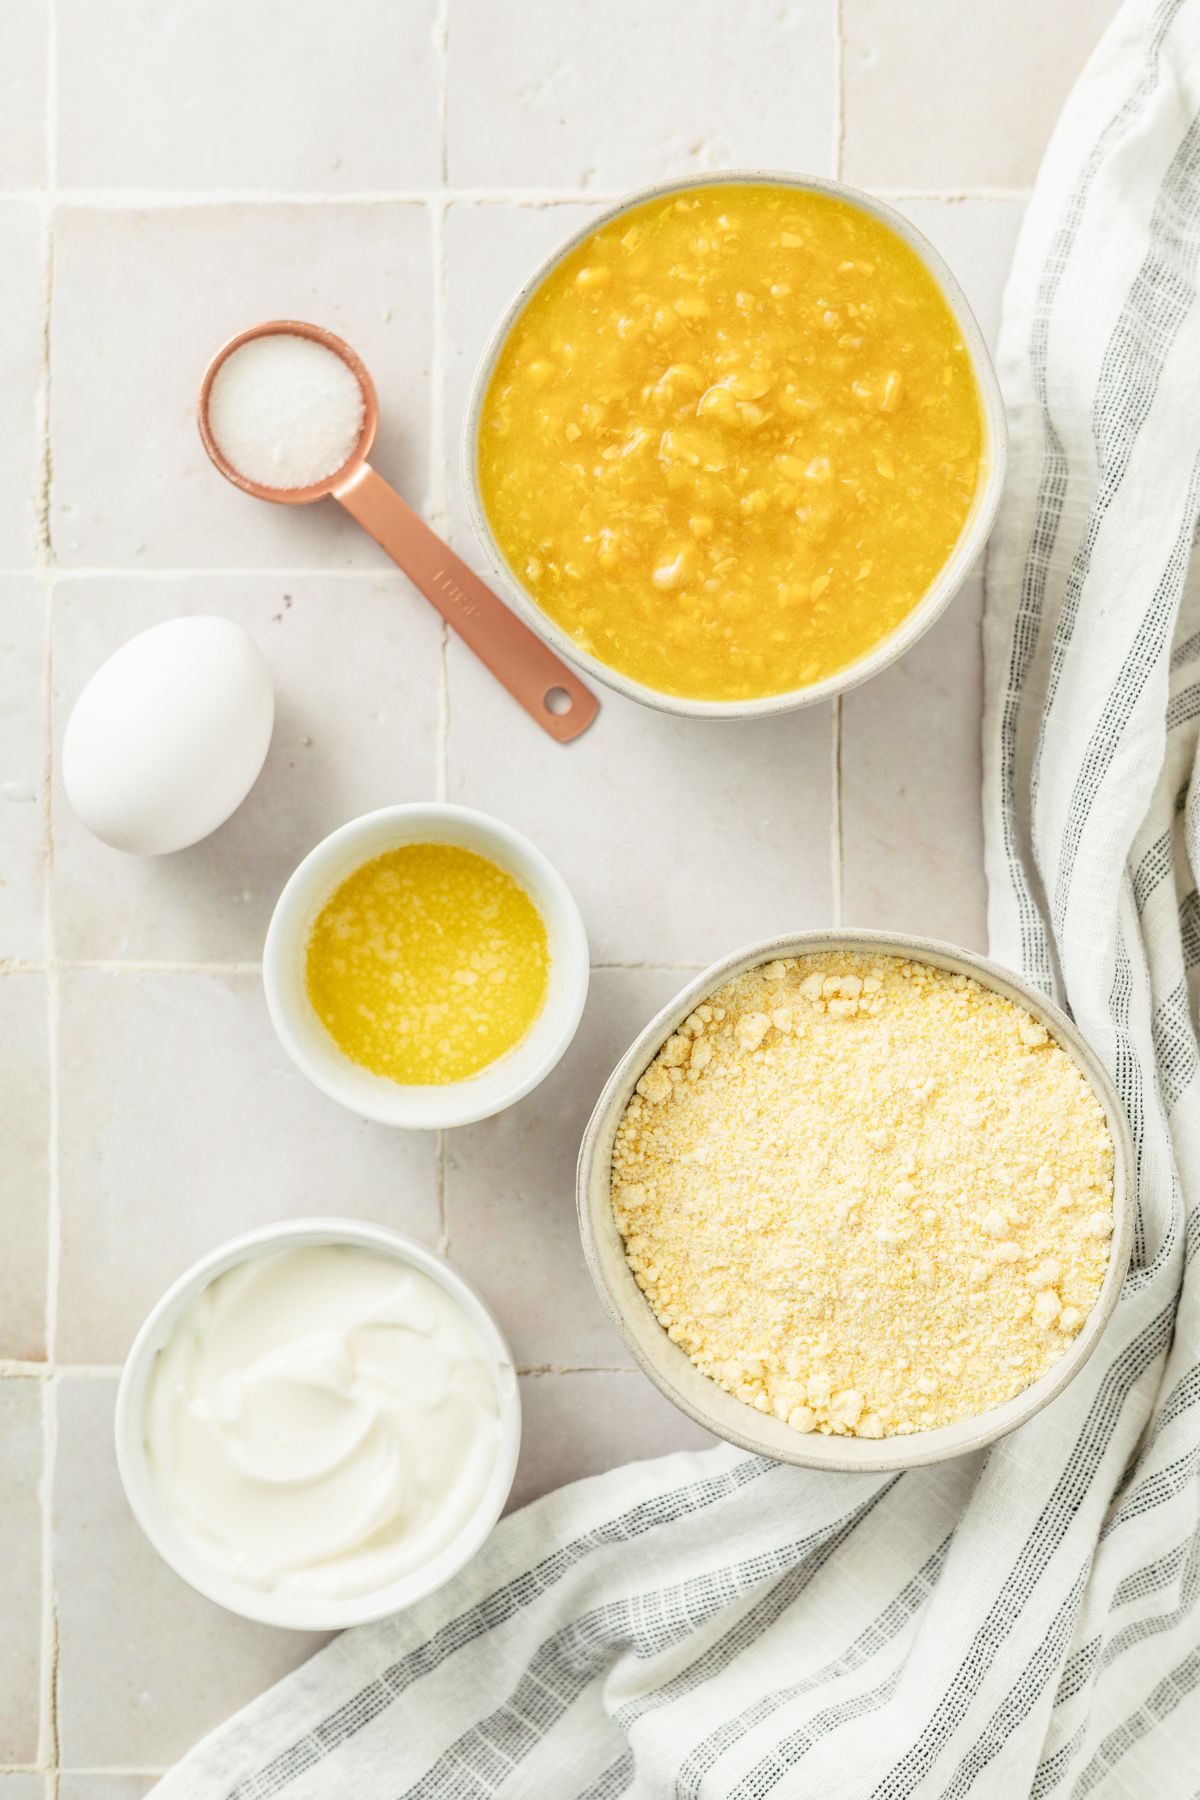 ingredients to make the best jiffy cornbread recipe with creamed corn: Jiffy corn muffin mix, sugar, melted butter, egg, sour cream, and creamed corn in separate bowls